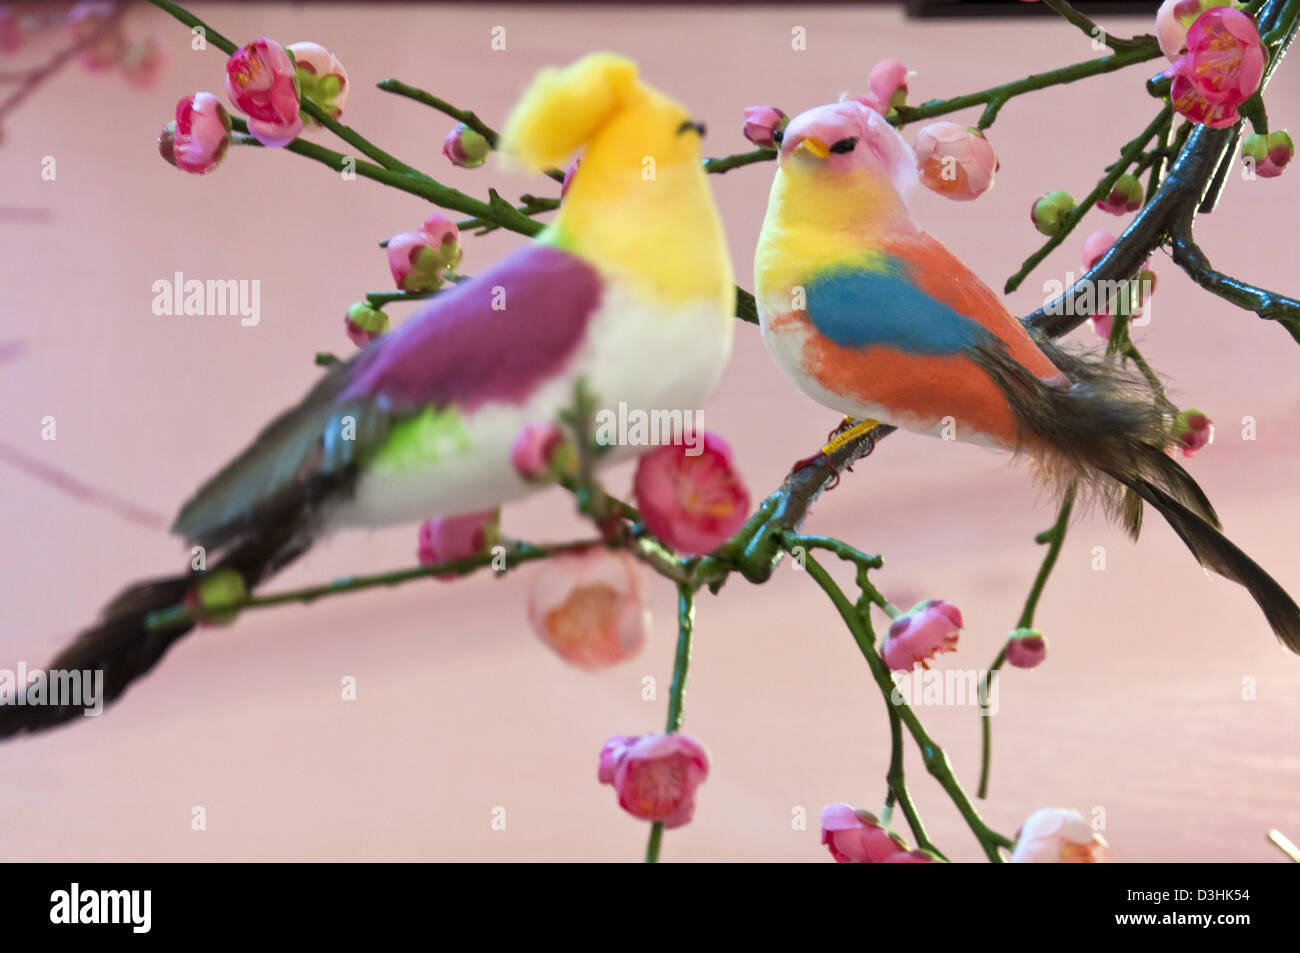 two birds are singing on the branches full of flowers blossom Stock Photo